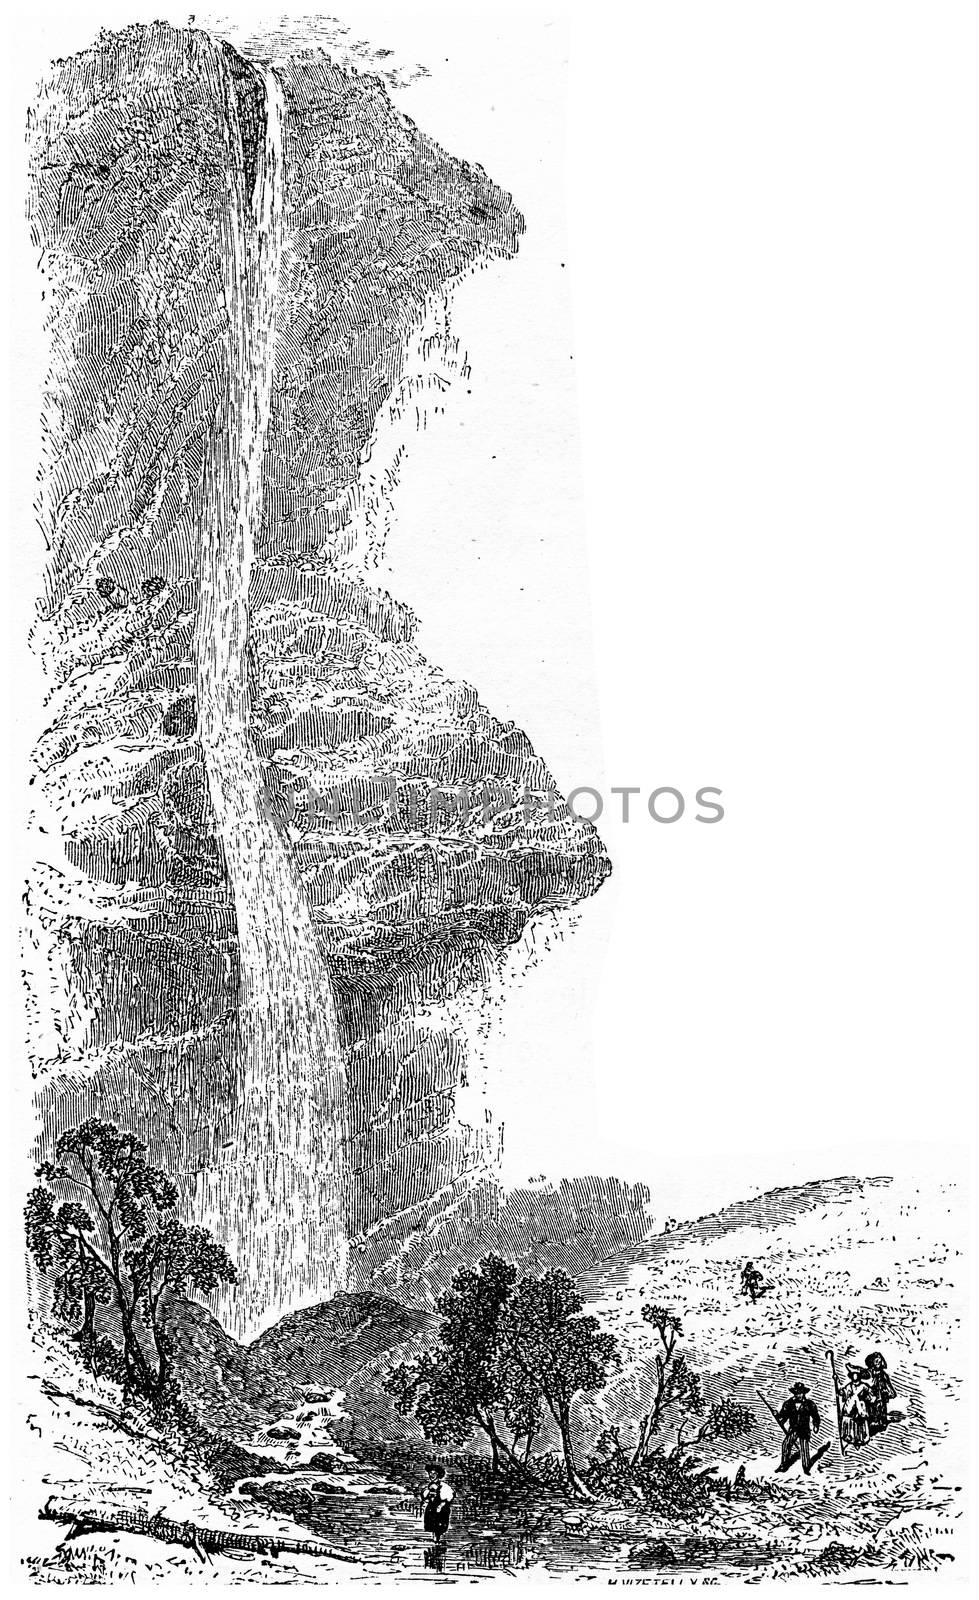 Staubbach Falls, vintage engraved illustration. From Chemin des Ecoliers, 1861.
